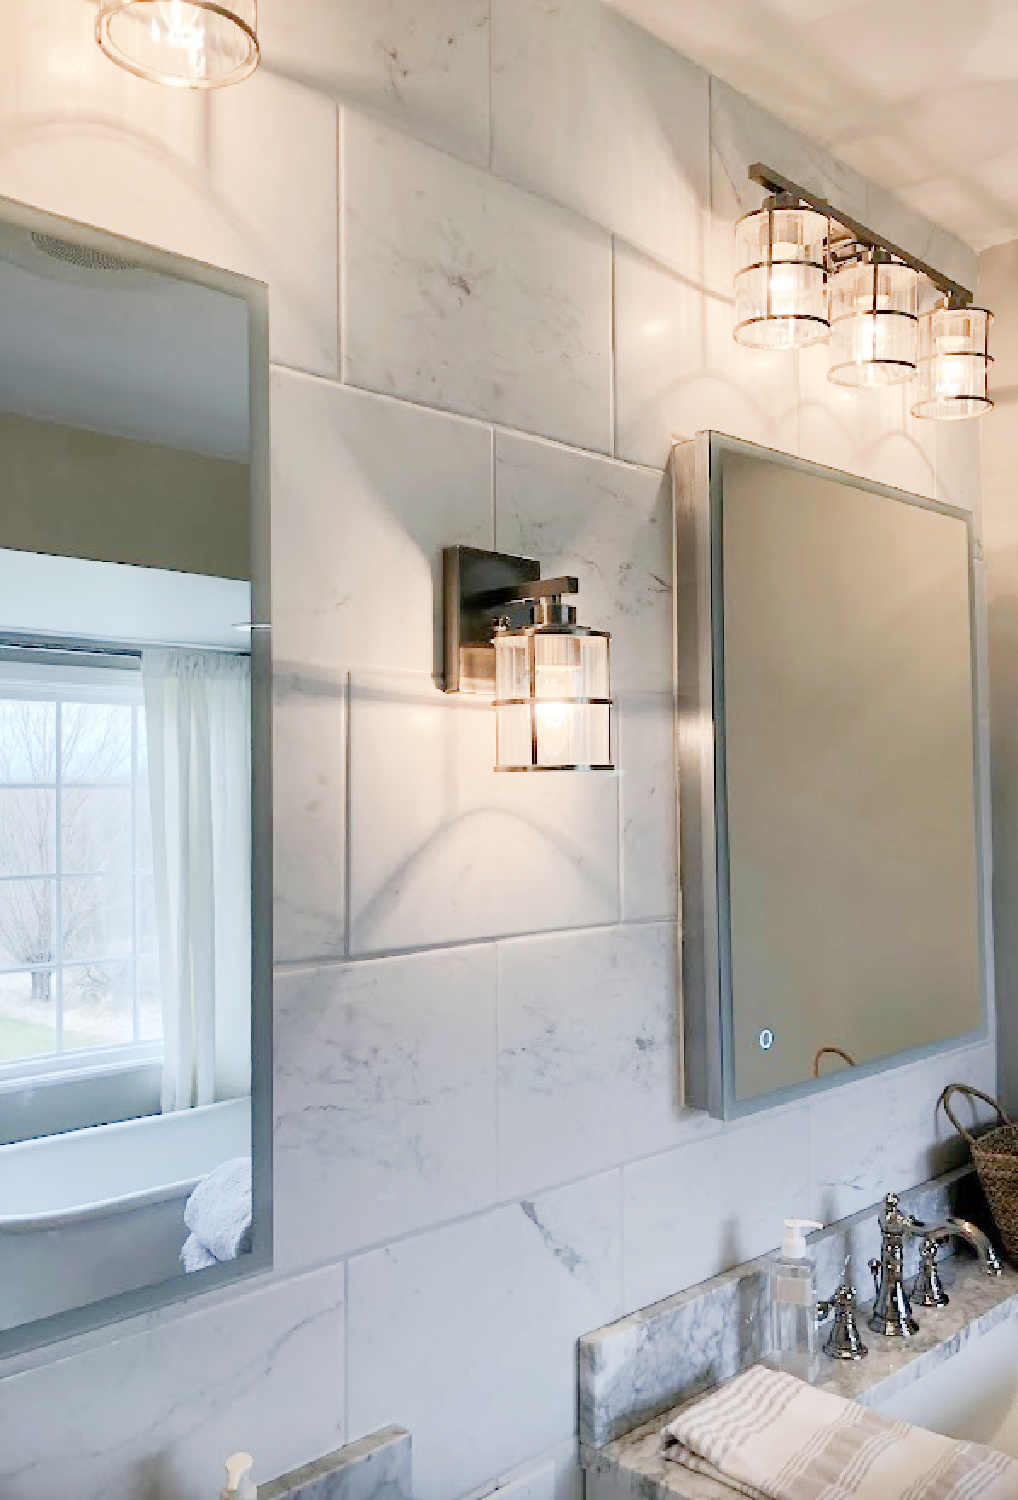 Lantern style vanity lighting on marble look porcelain tiled wall with modern LED medicine cabinets over Shaker style vanities with marble tops - modern French bath renovation at the Georgian by Hello Lovely Studio.